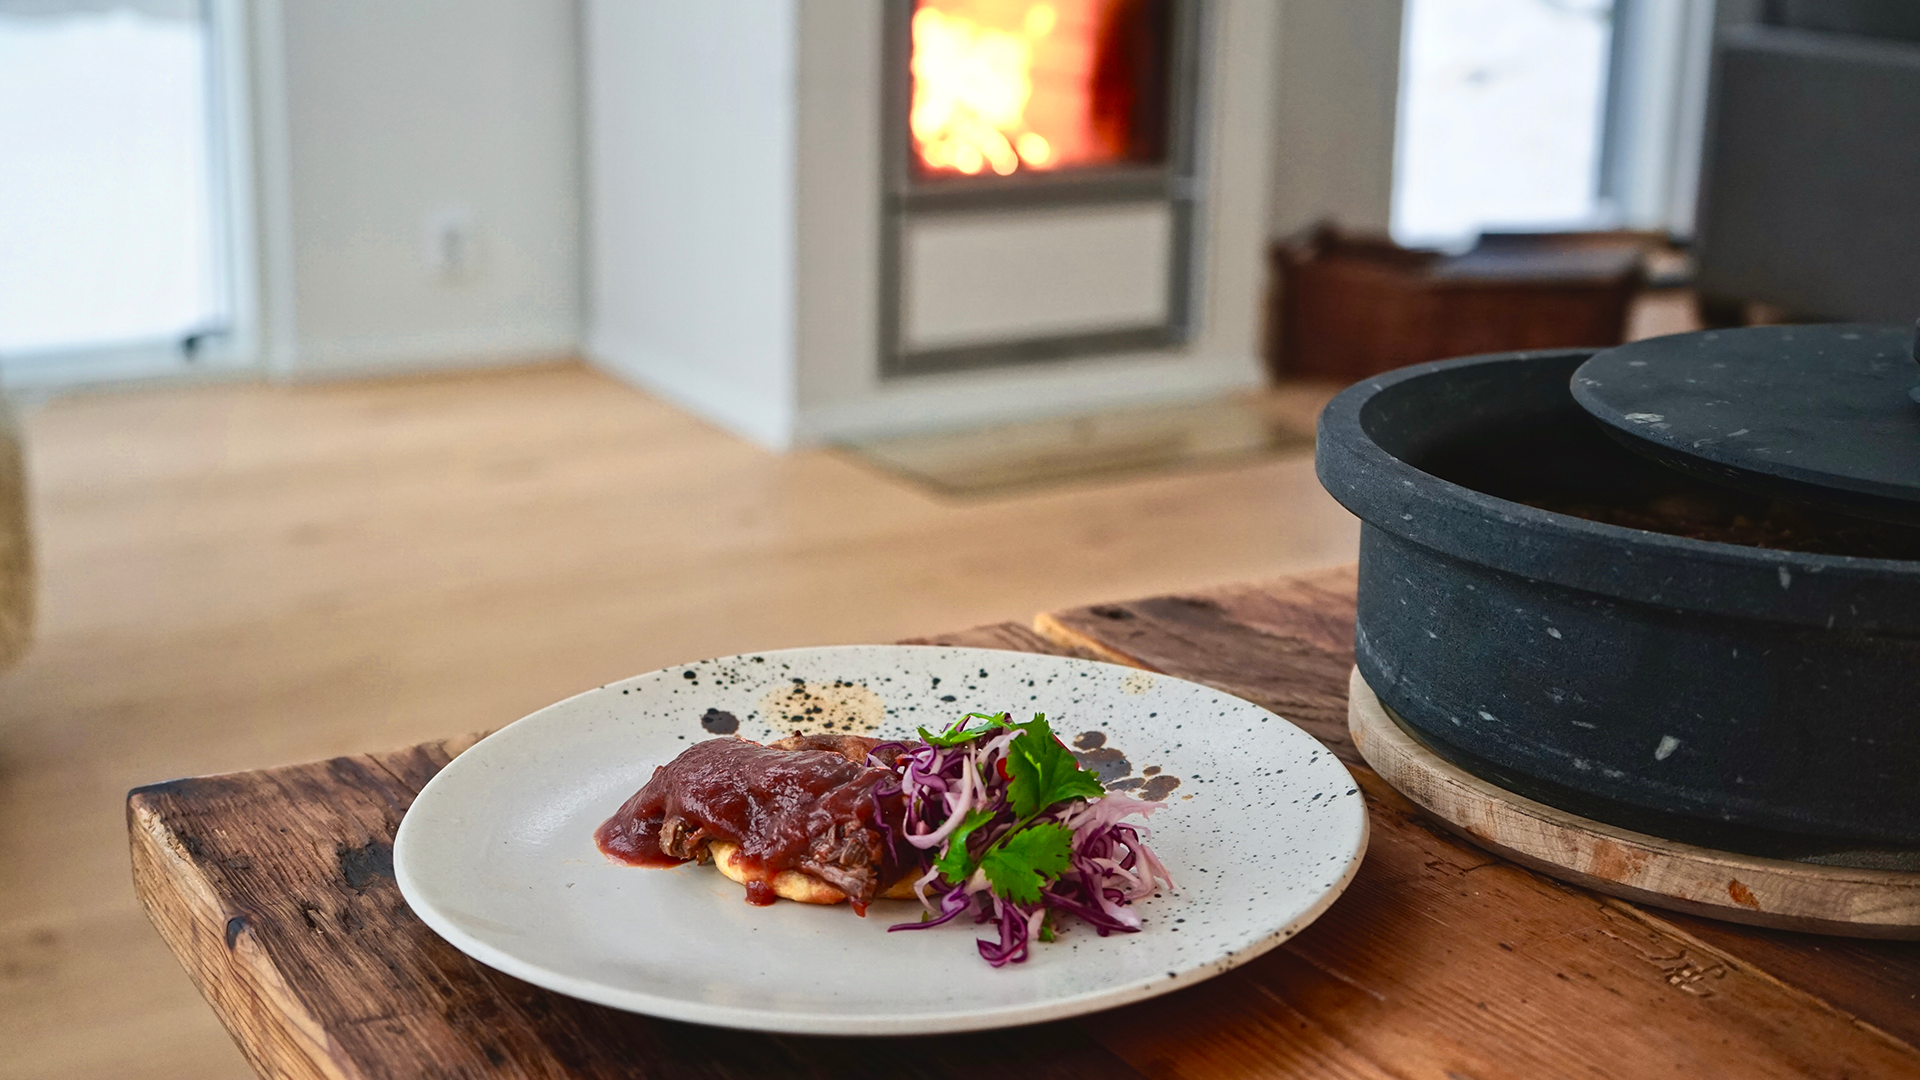 Take advantage of the warmth of the fireplace and cook Tulikivi Cooking with products